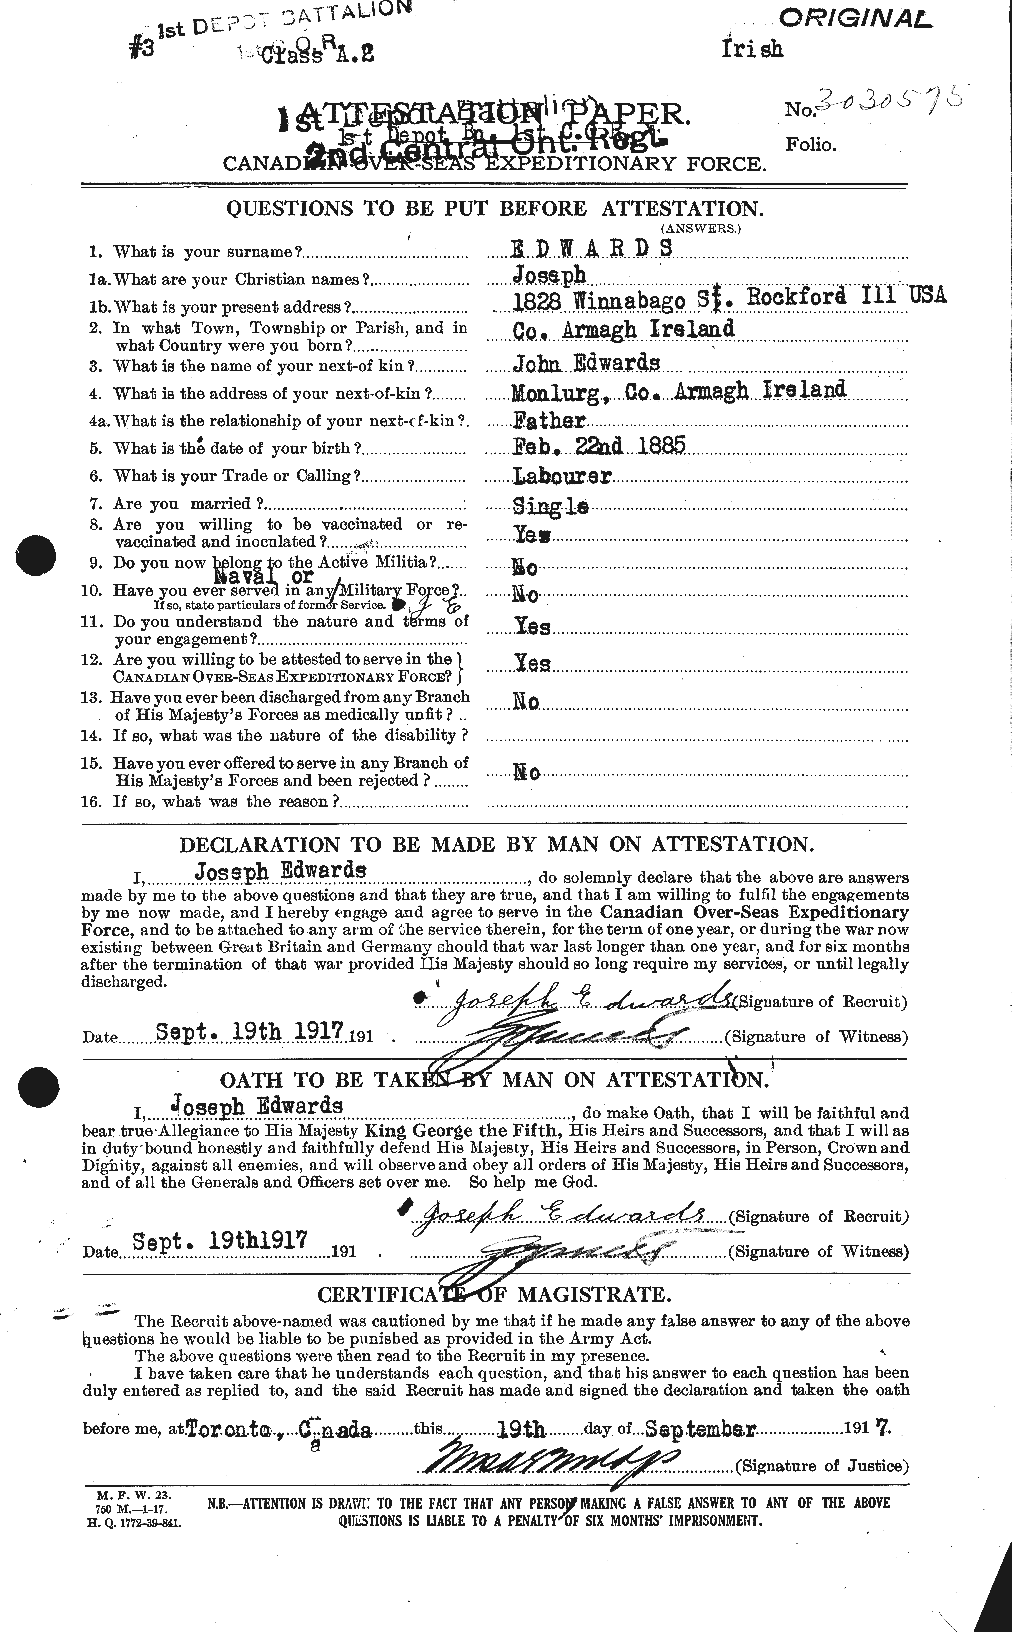 Personnel Records of the First World War - CEF 310169a